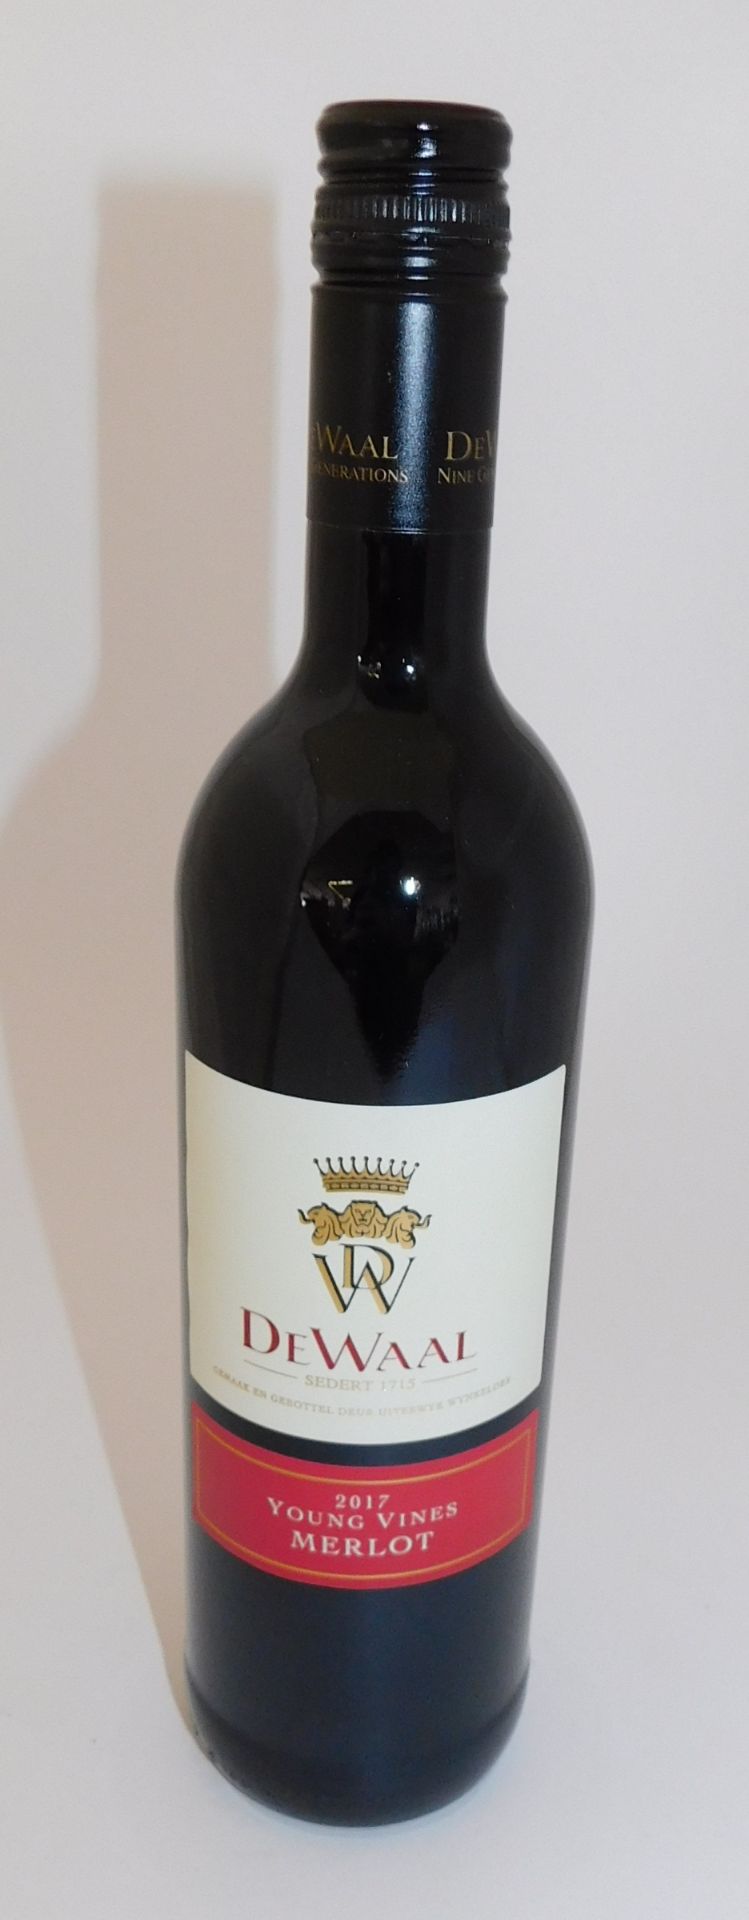 36 bottles of De Waal Merlot, 750ml (Located Stockport – See General Notes for More Details)